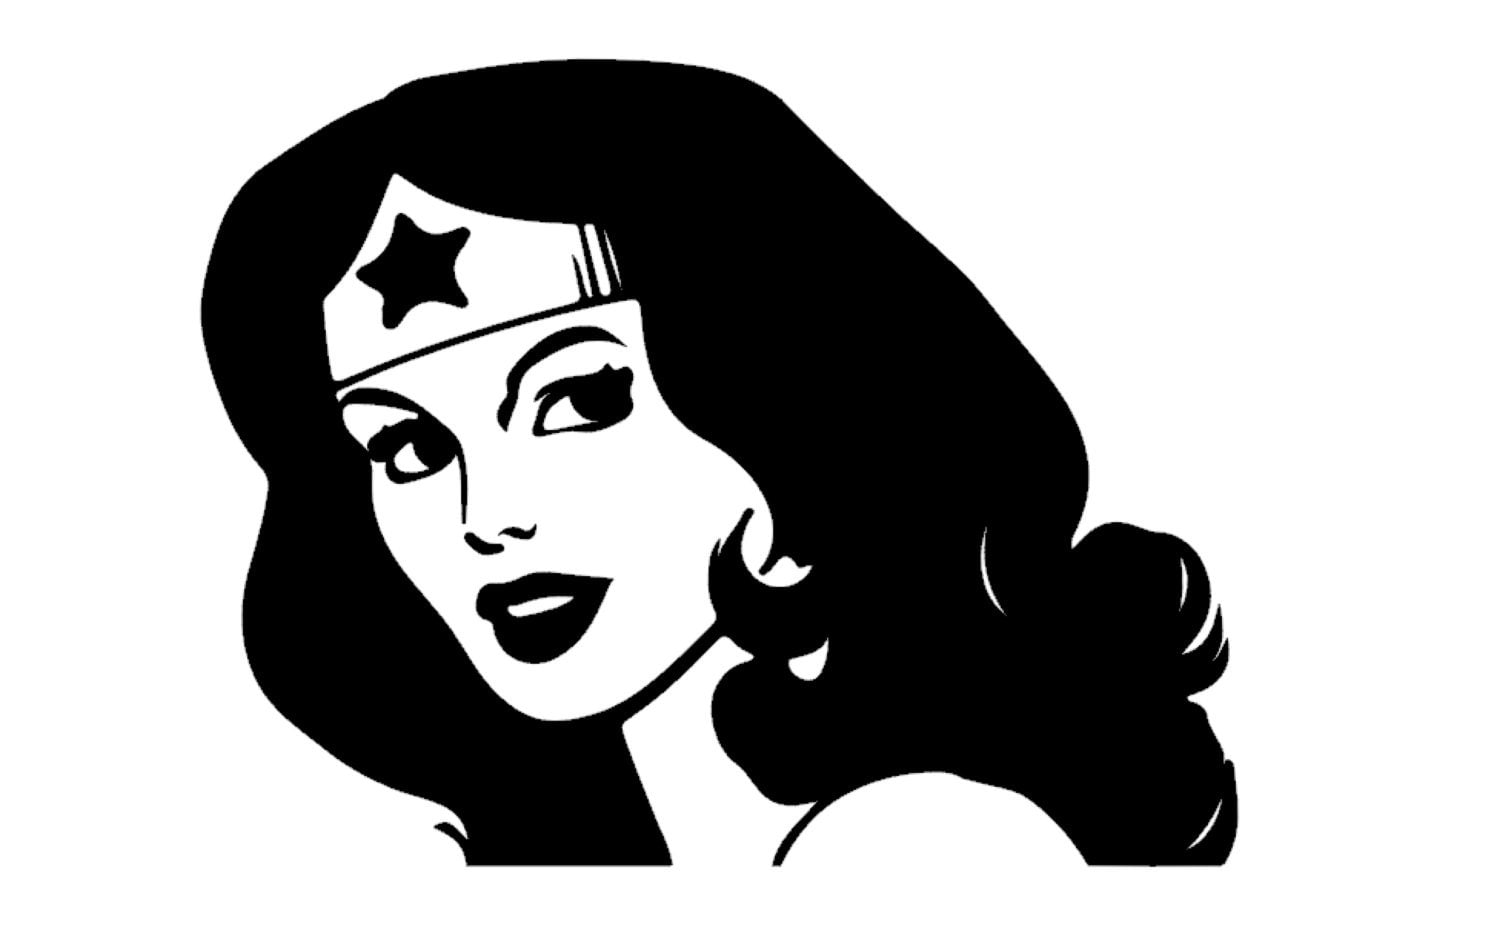 Download Wonder Woman Vinyl Car Decal by DessicaDupin on Etsy